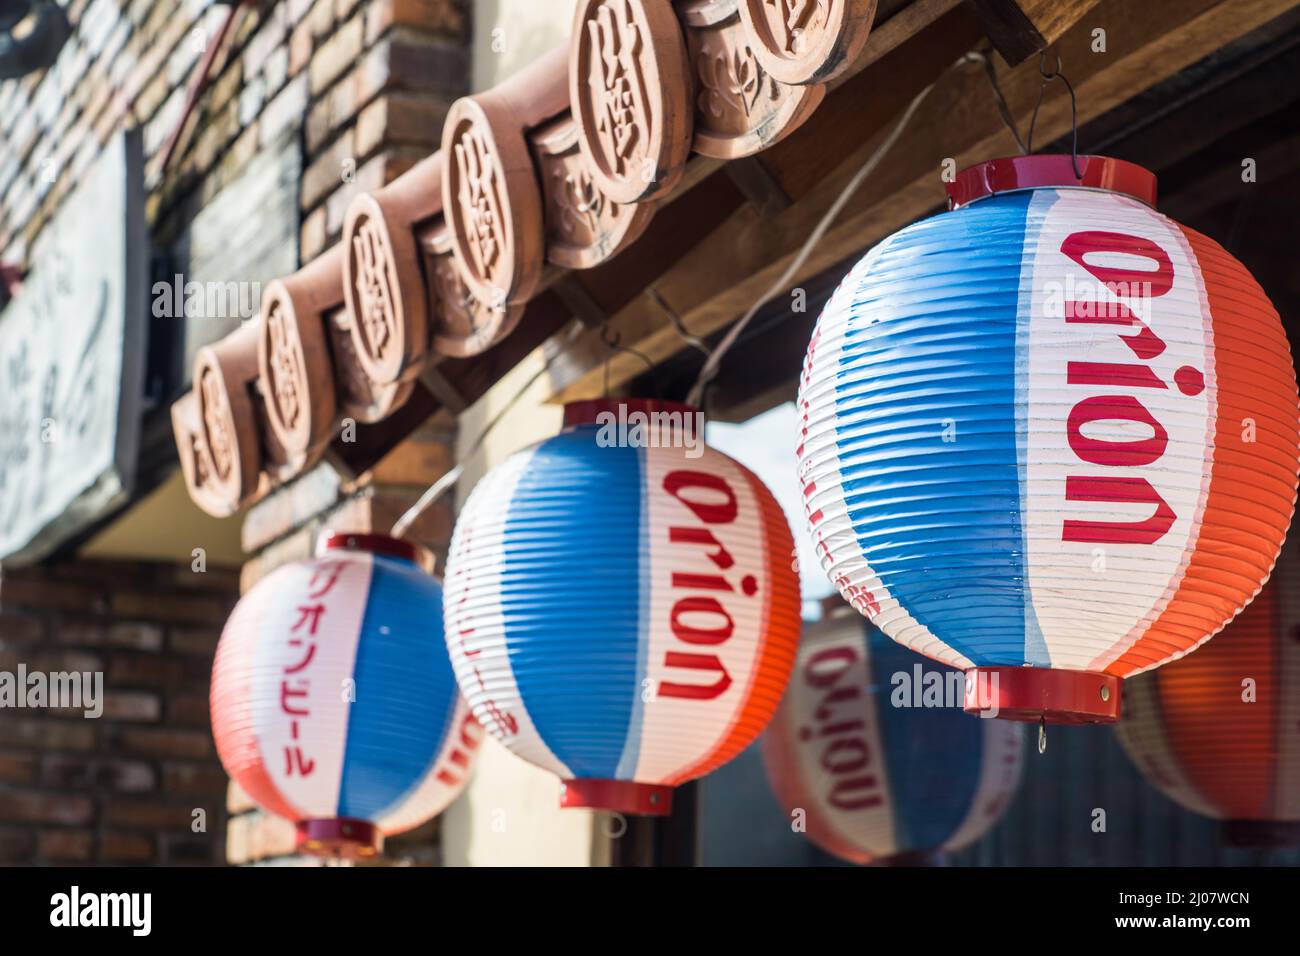 Close up of red, blue and white hanging paper Japanese lanterns promoting Orion beer outside an Okinawa restaurant in Nara, Japan Stock Photo